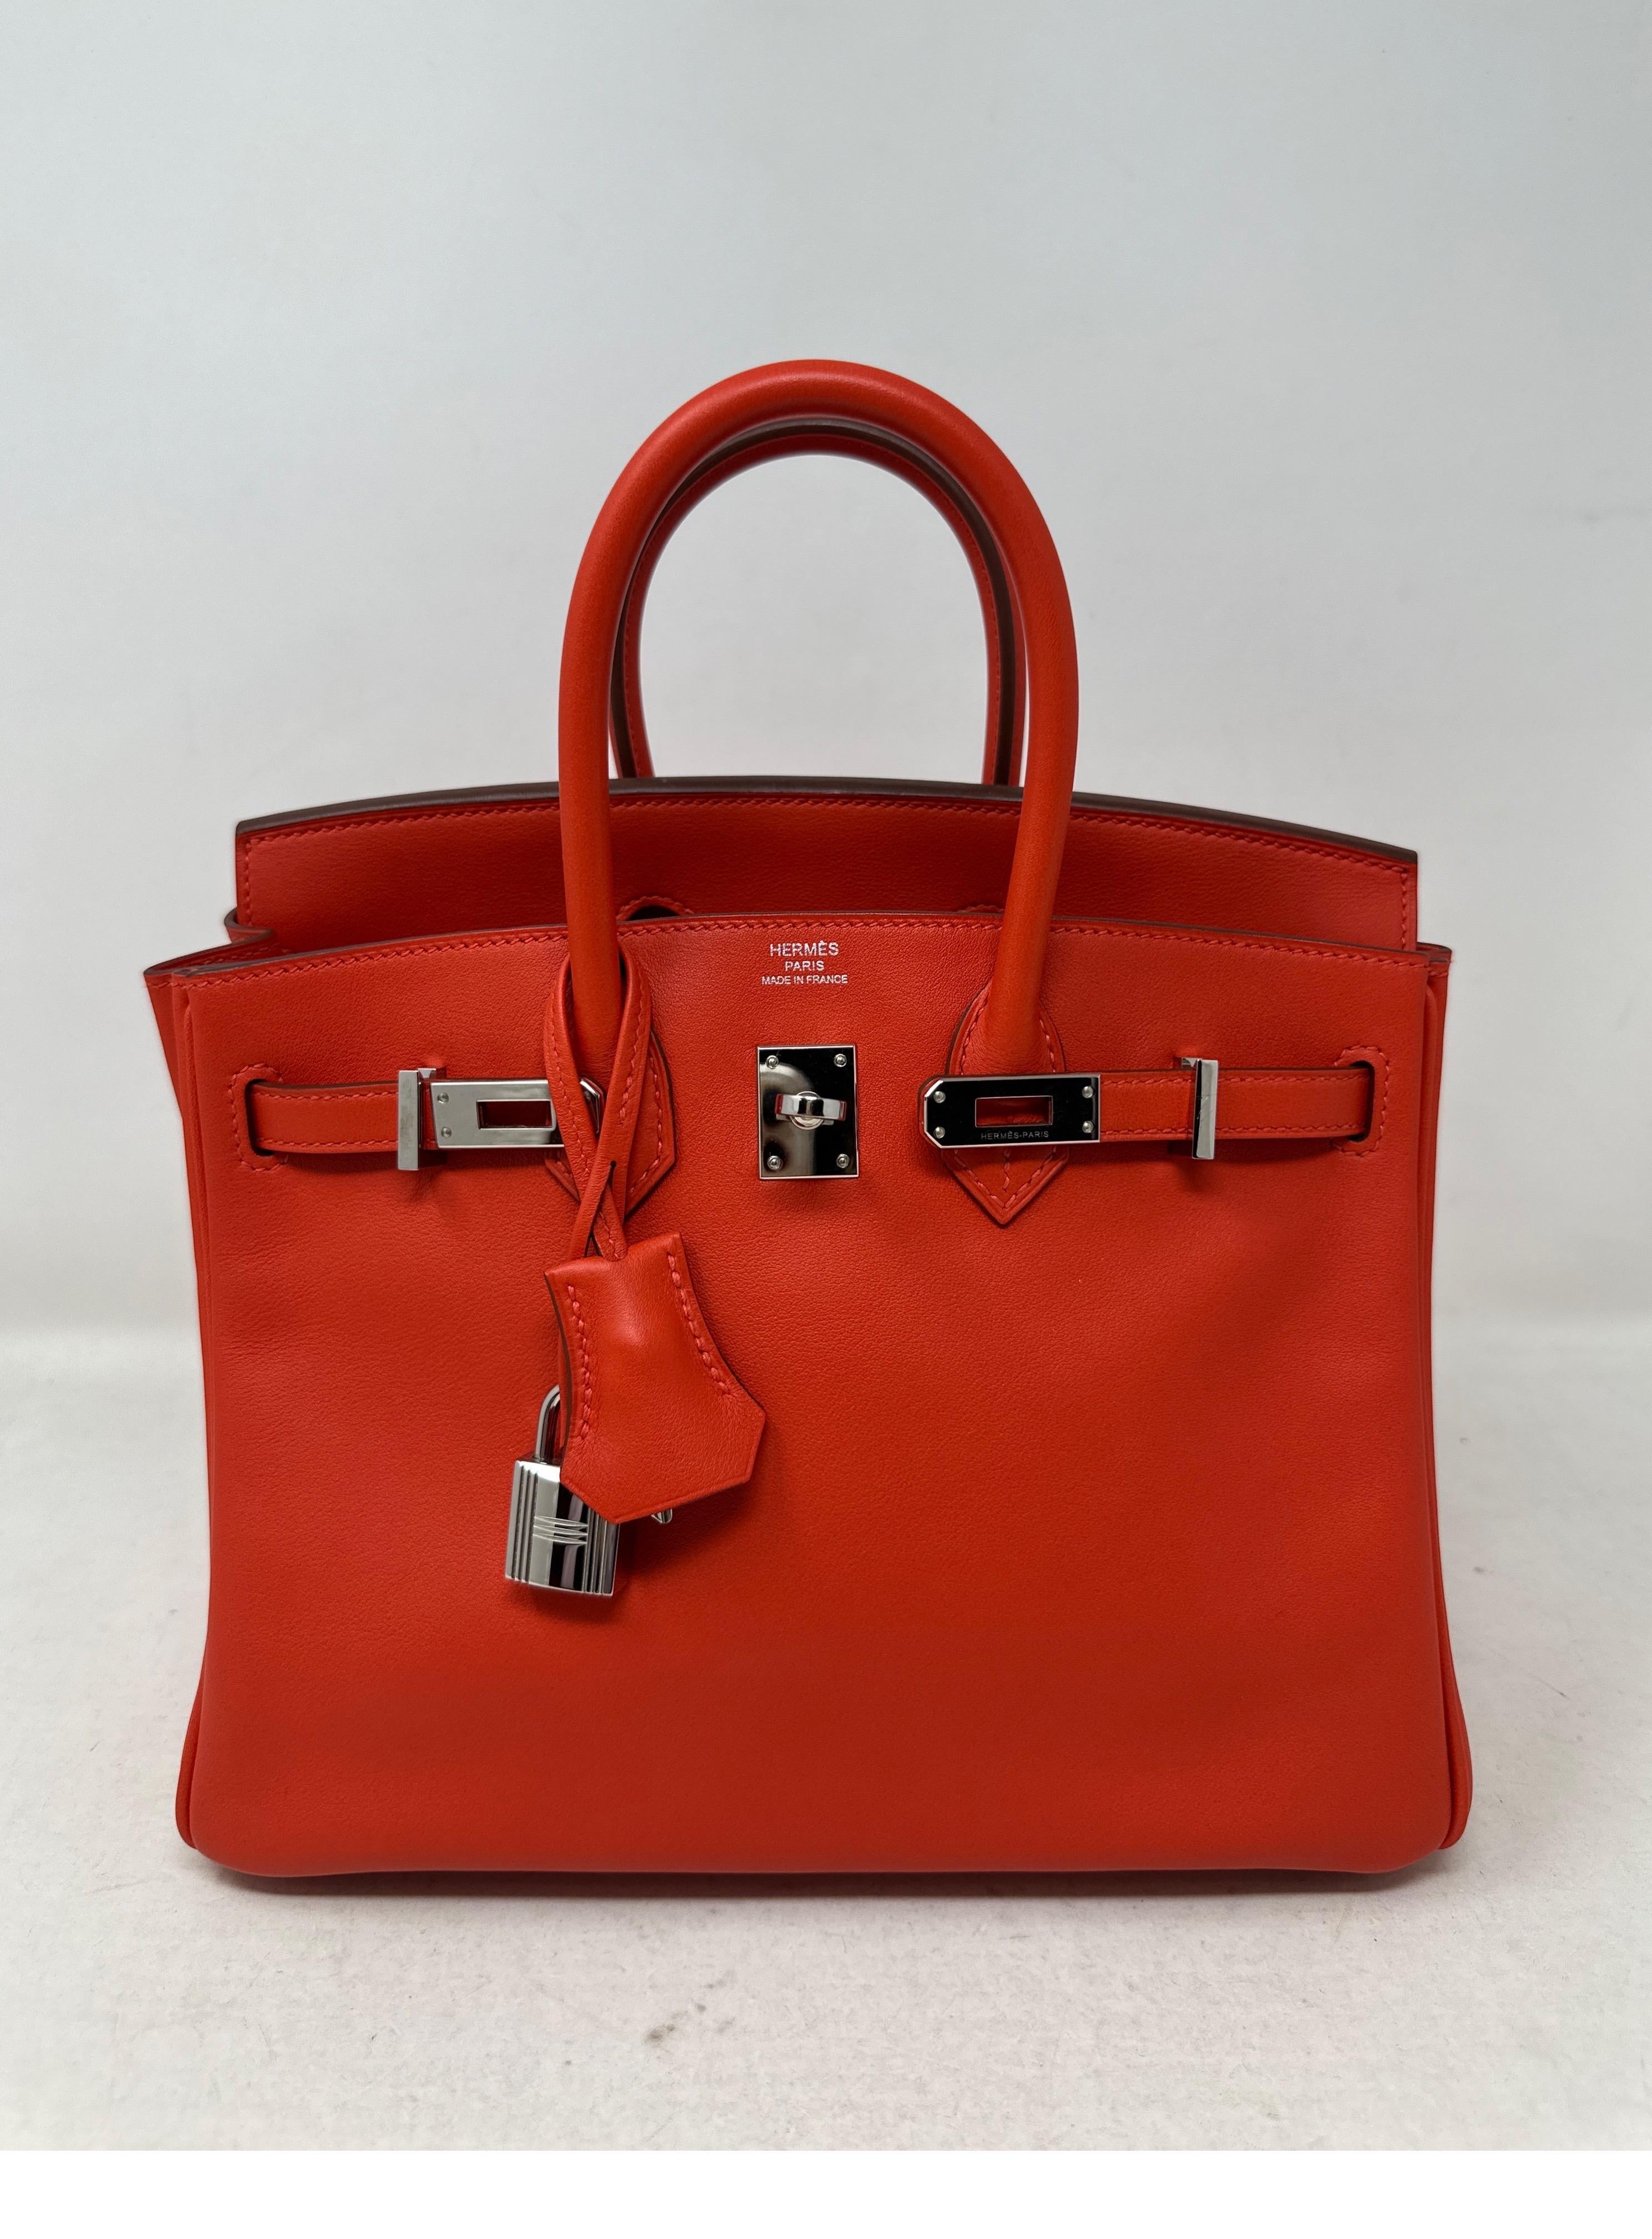 Hermes Rouge Tomate Birkin 25 Bag. Beautiful orange red color in smooth swift leather. Palladium silver hardware. Excellent condition. Interior clean. Includes clochette, lock, keys, and dust bag. Guaranteed authentic. 